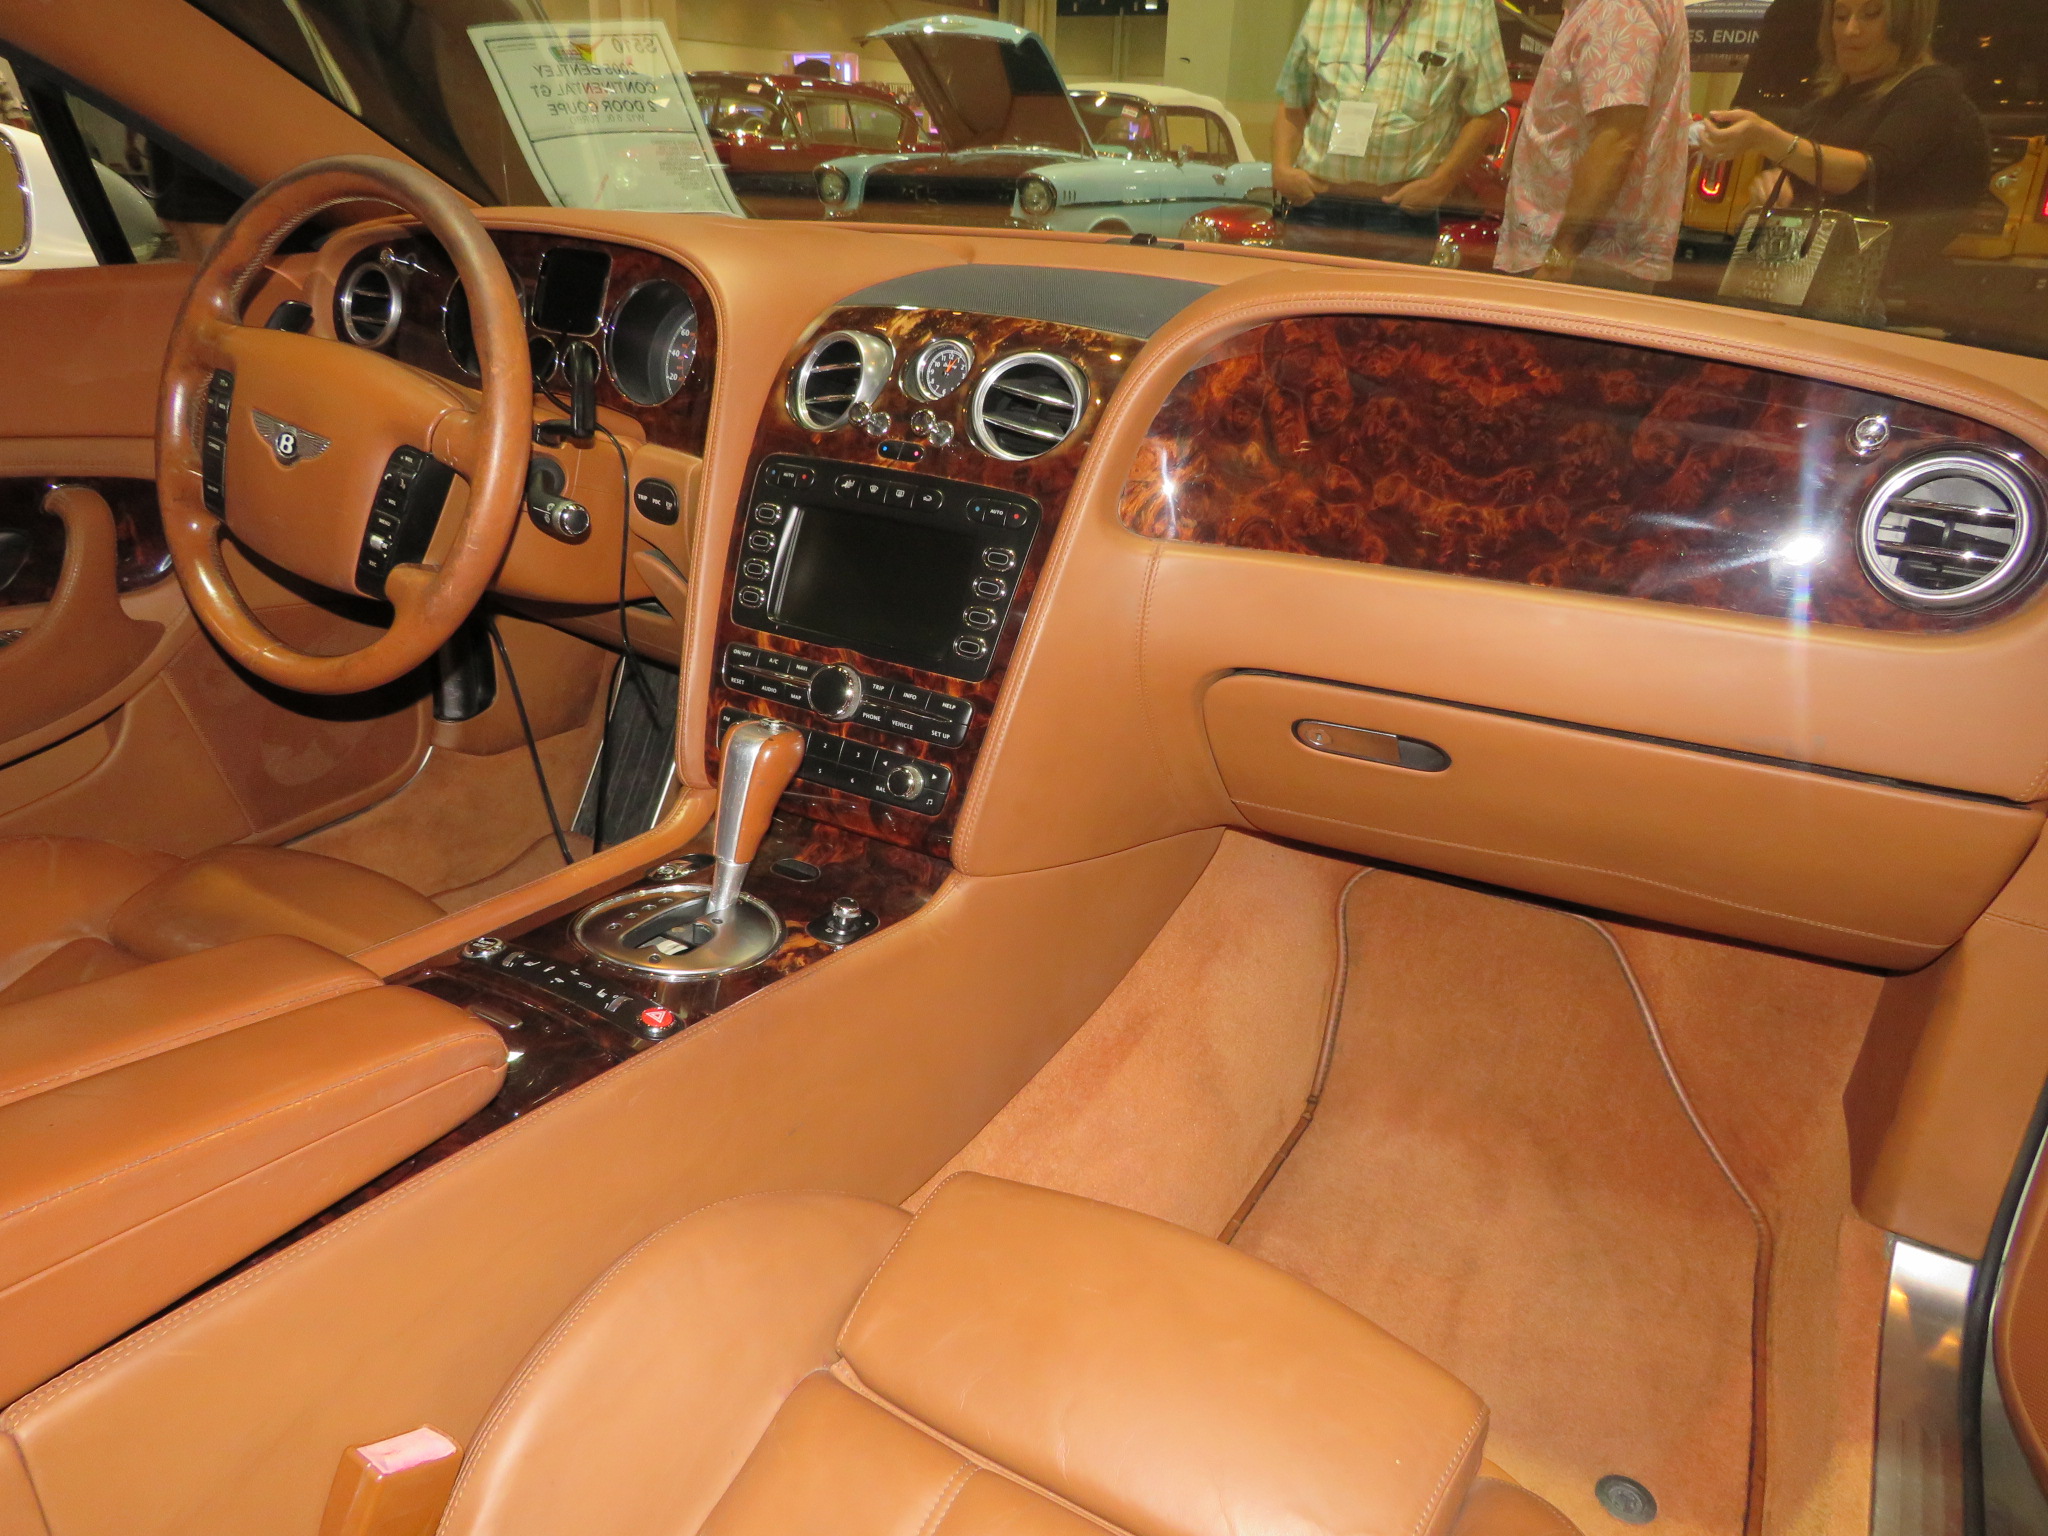 5th Image of a 2005 BENTLEY CONTINENTAL GT